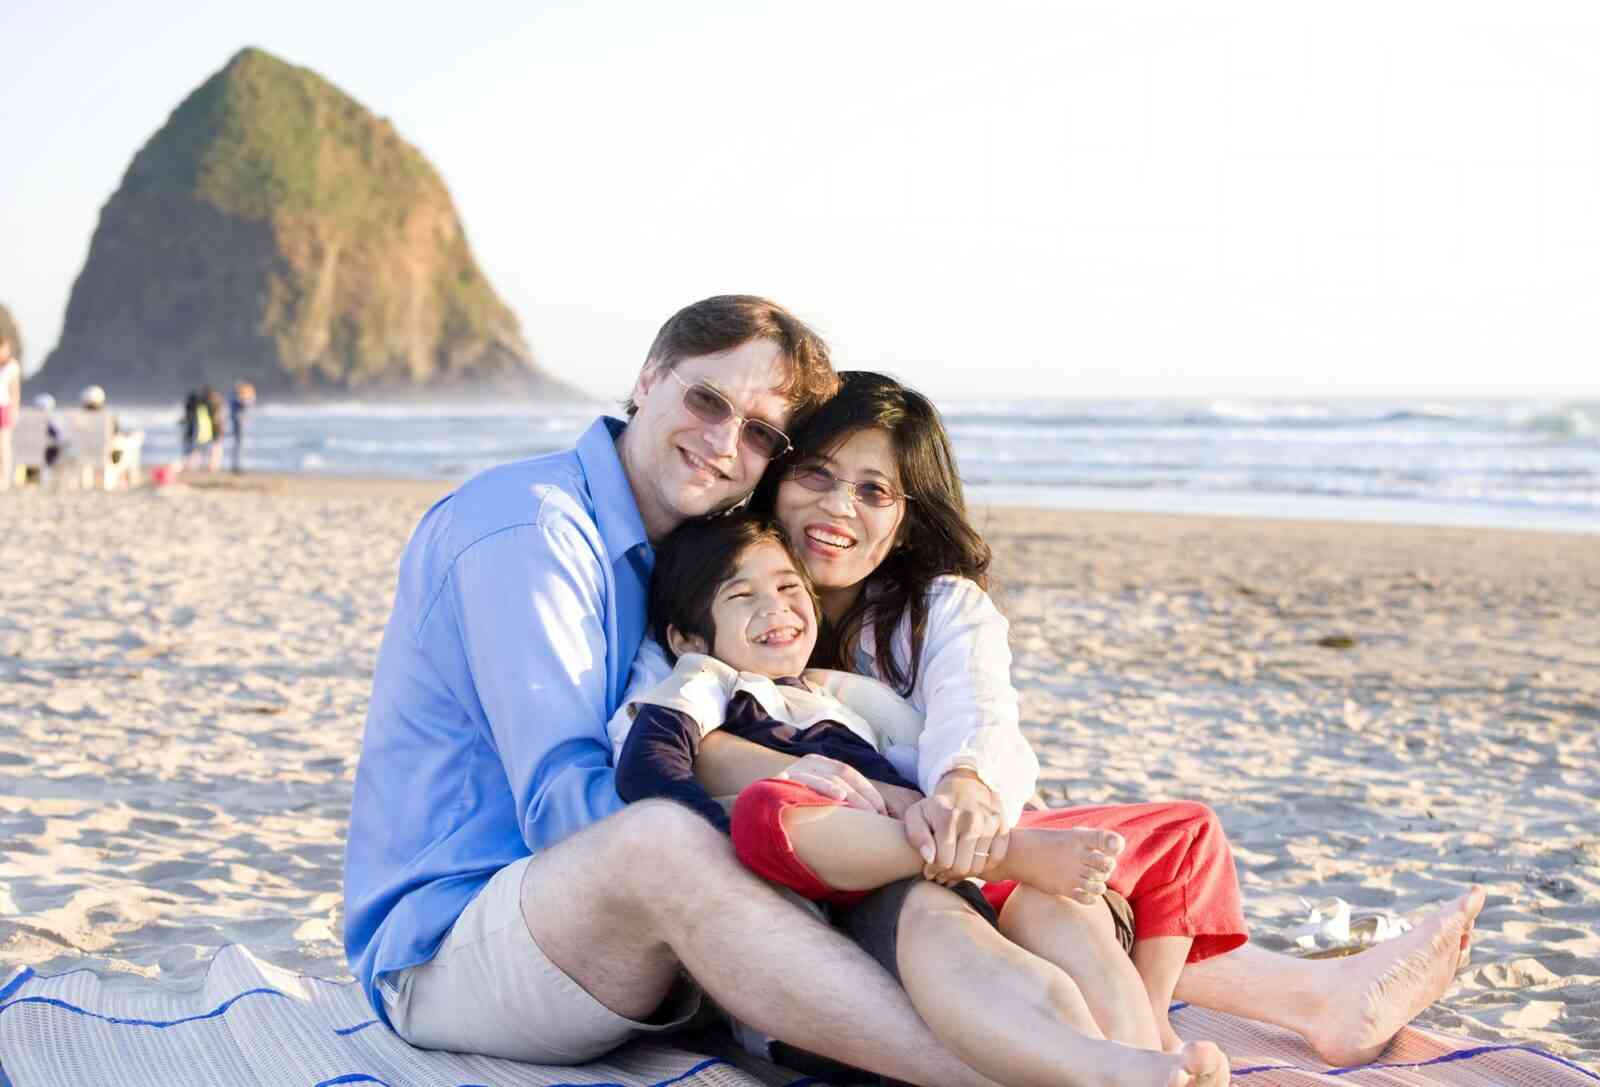 Little boy with cerebral palsy and his parents sitting at the beach by the ocean.